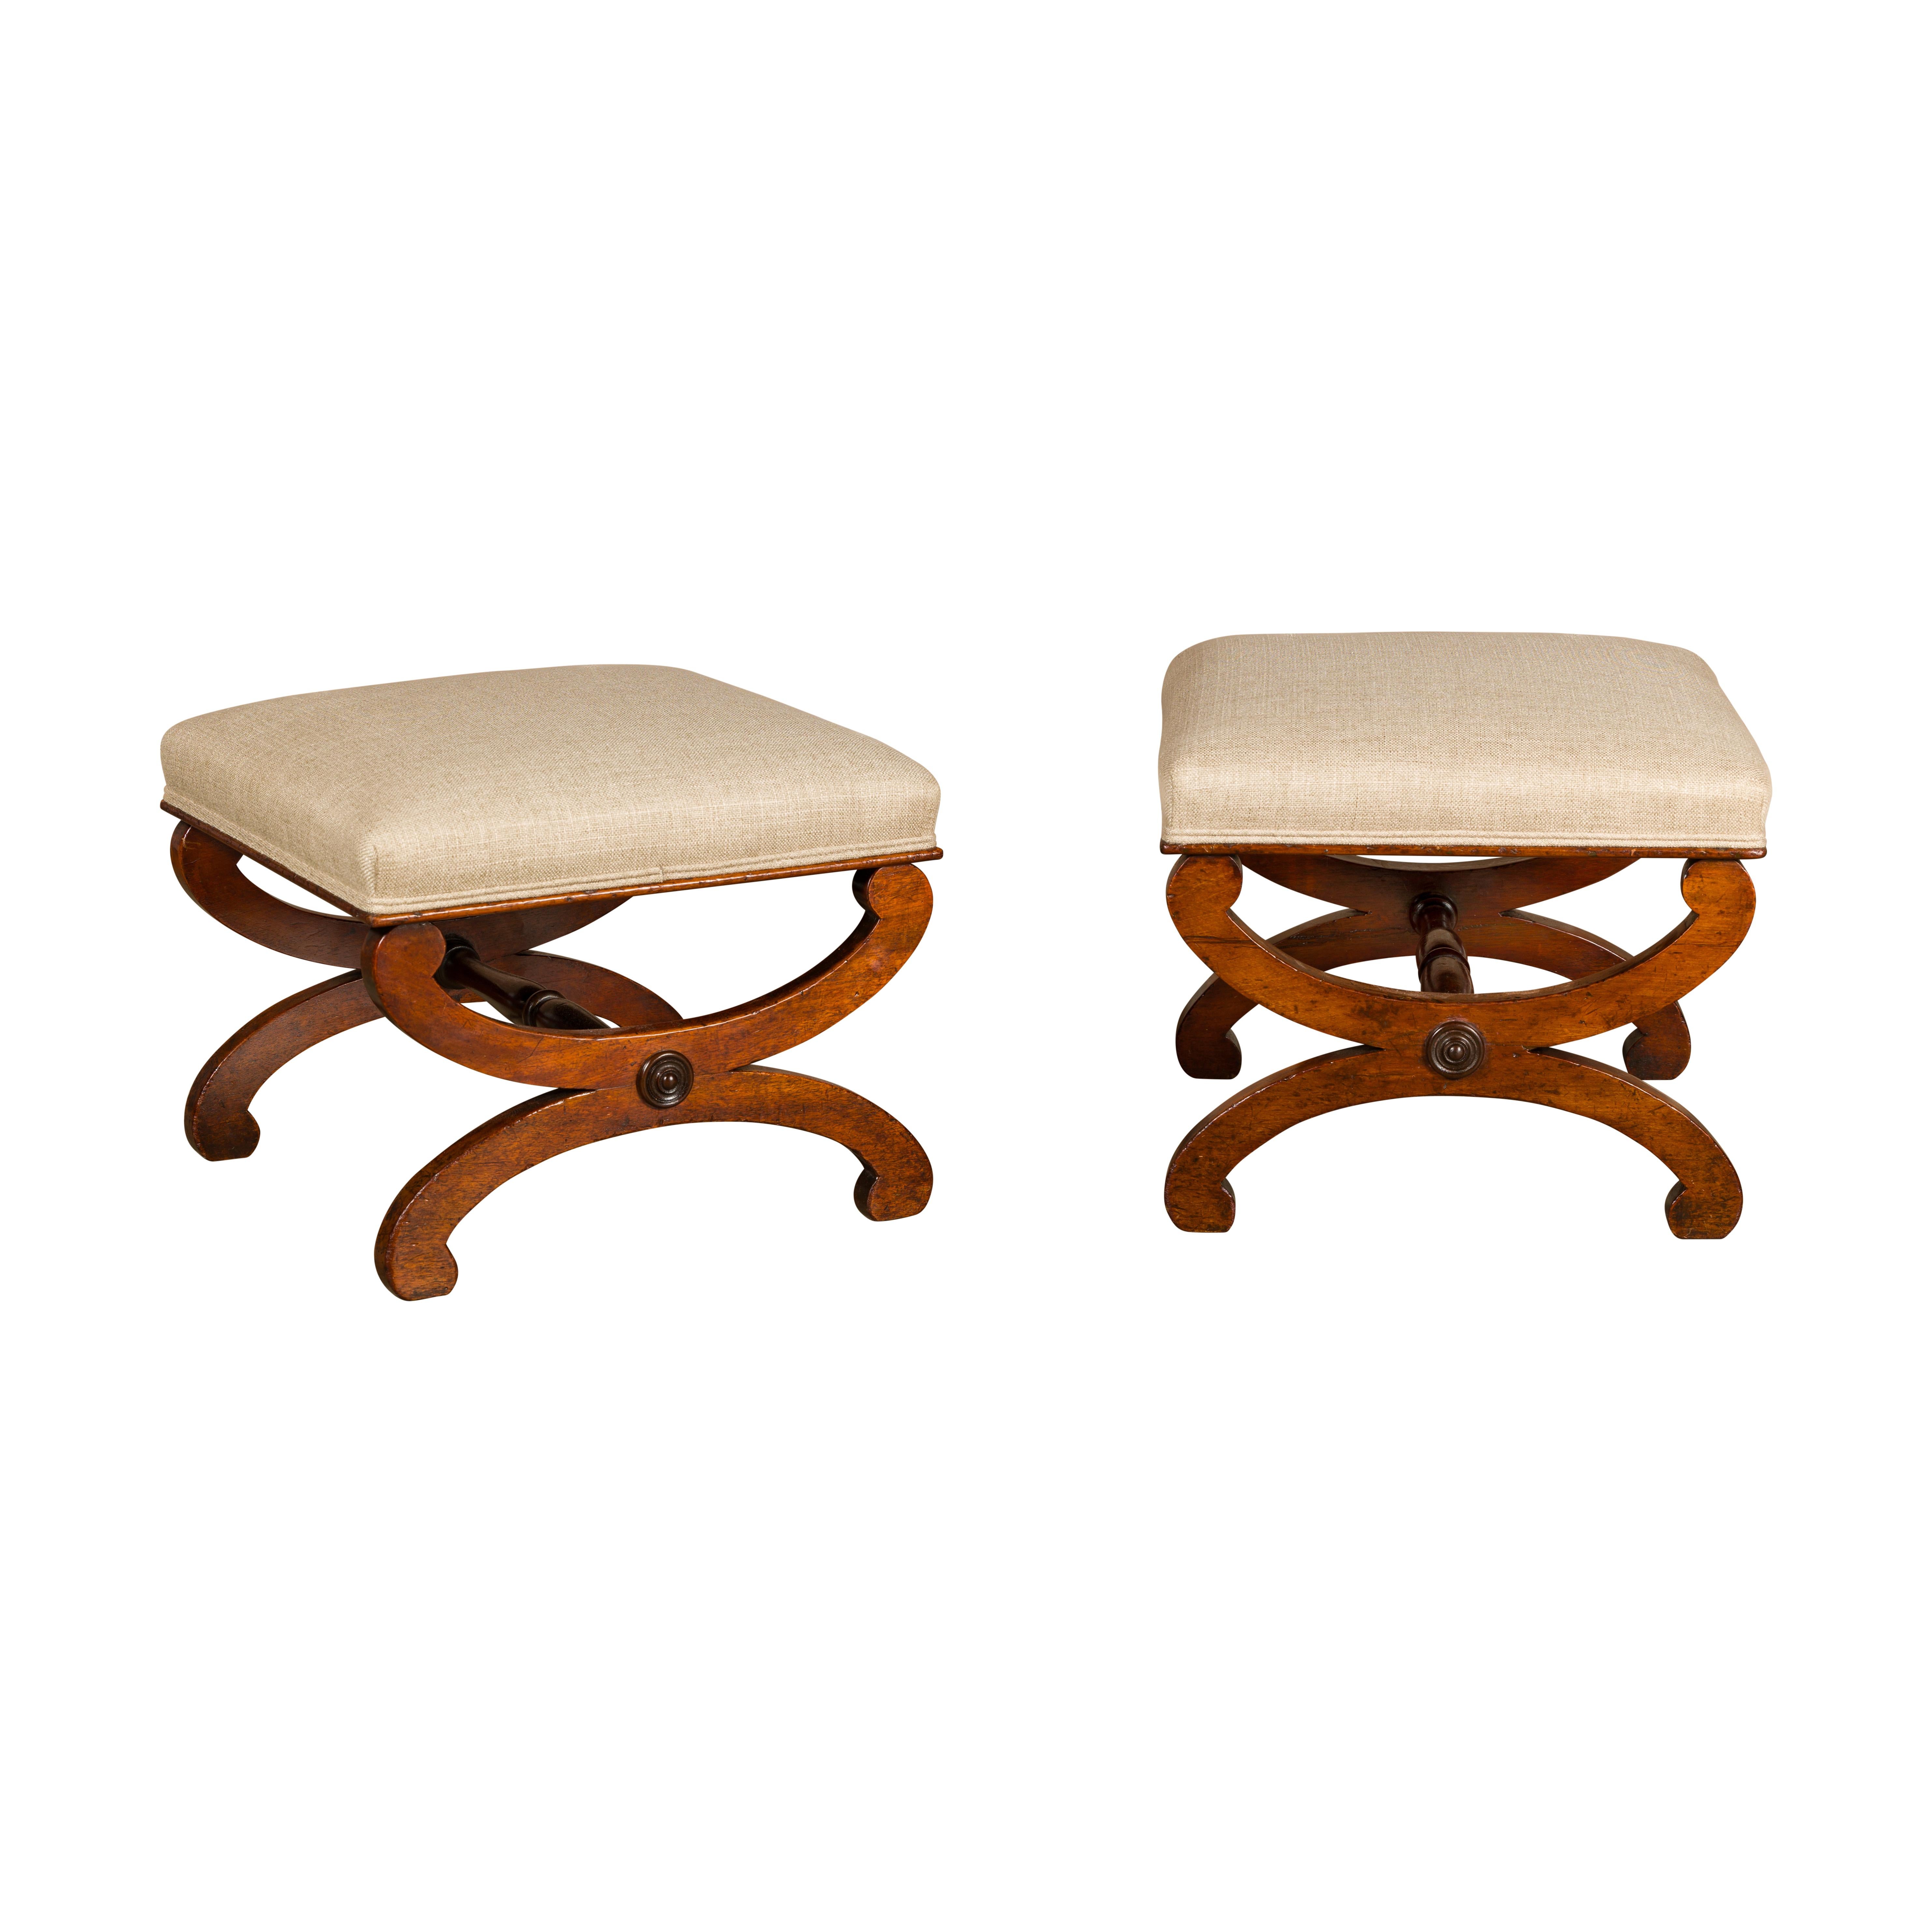 Biedermeier Period 19th Century Walnut Stools with X-Form Bases, a Pair For Sale 7